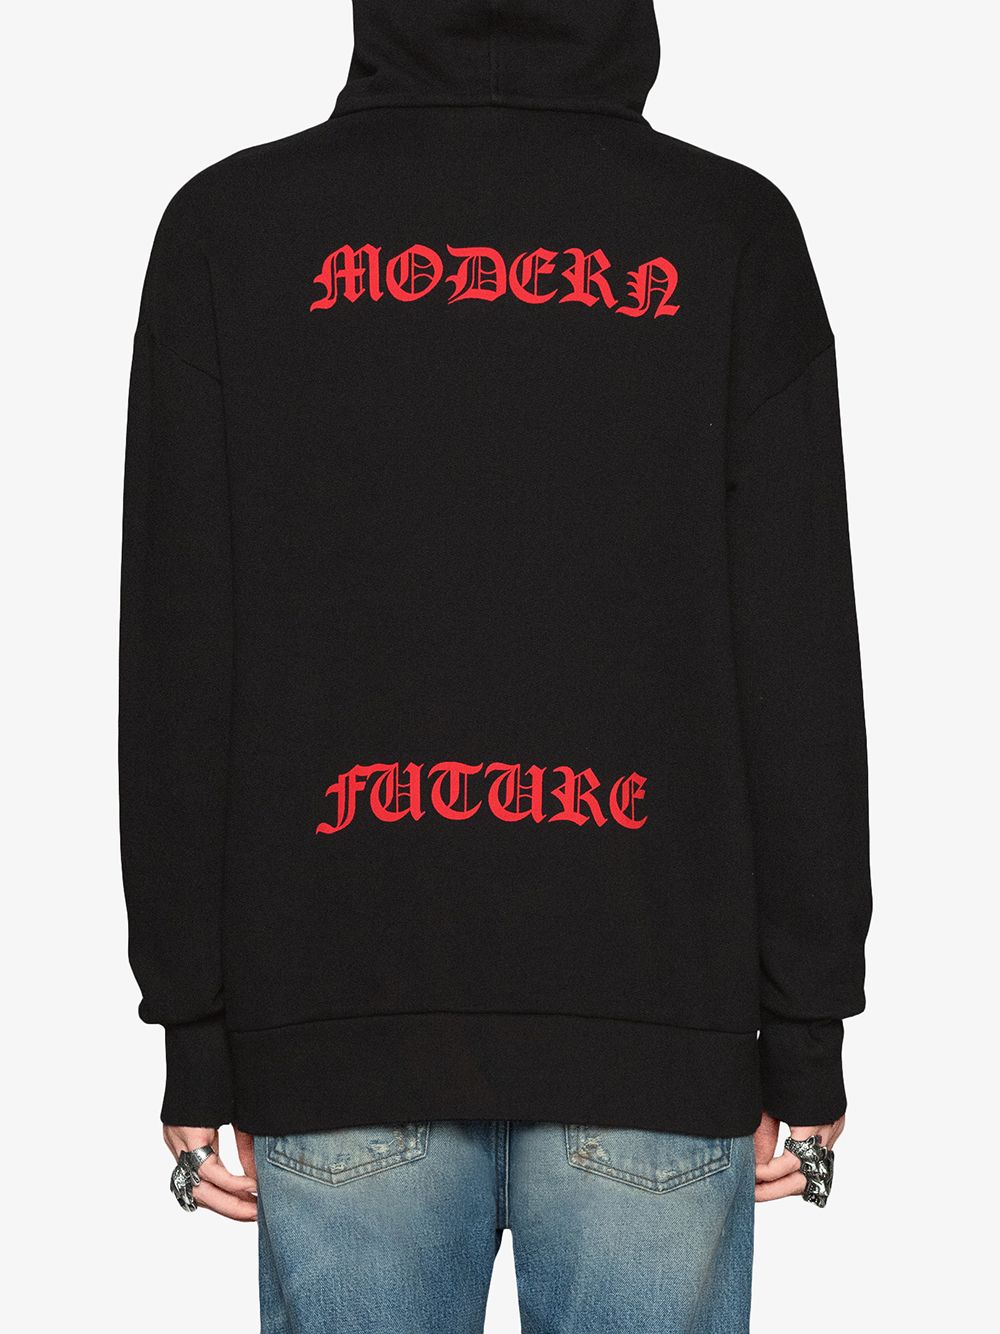 Gucci Cotton Sweatshirt With Angry Cat Appliqué - Farfetch